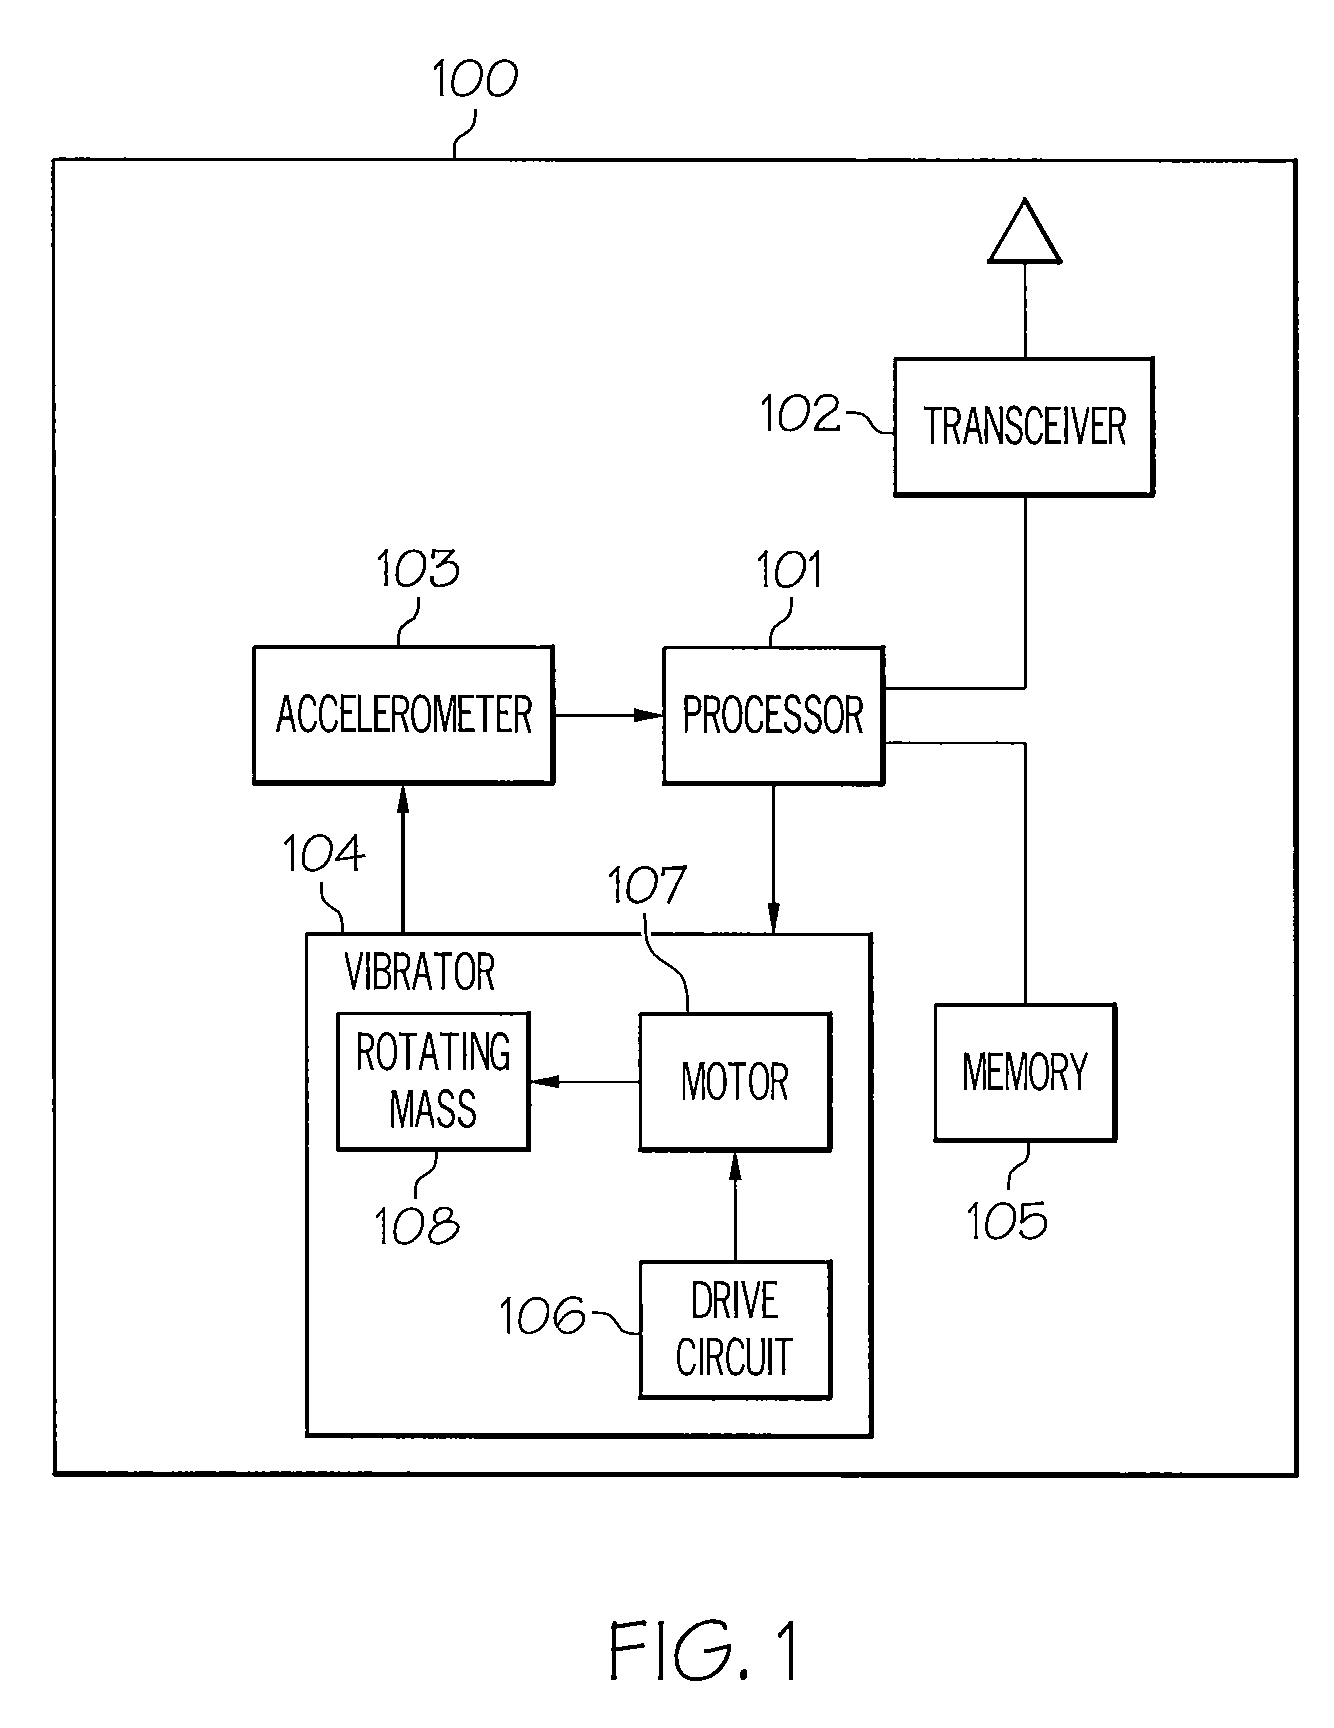 Use of an accelerometer to control vibrator performance